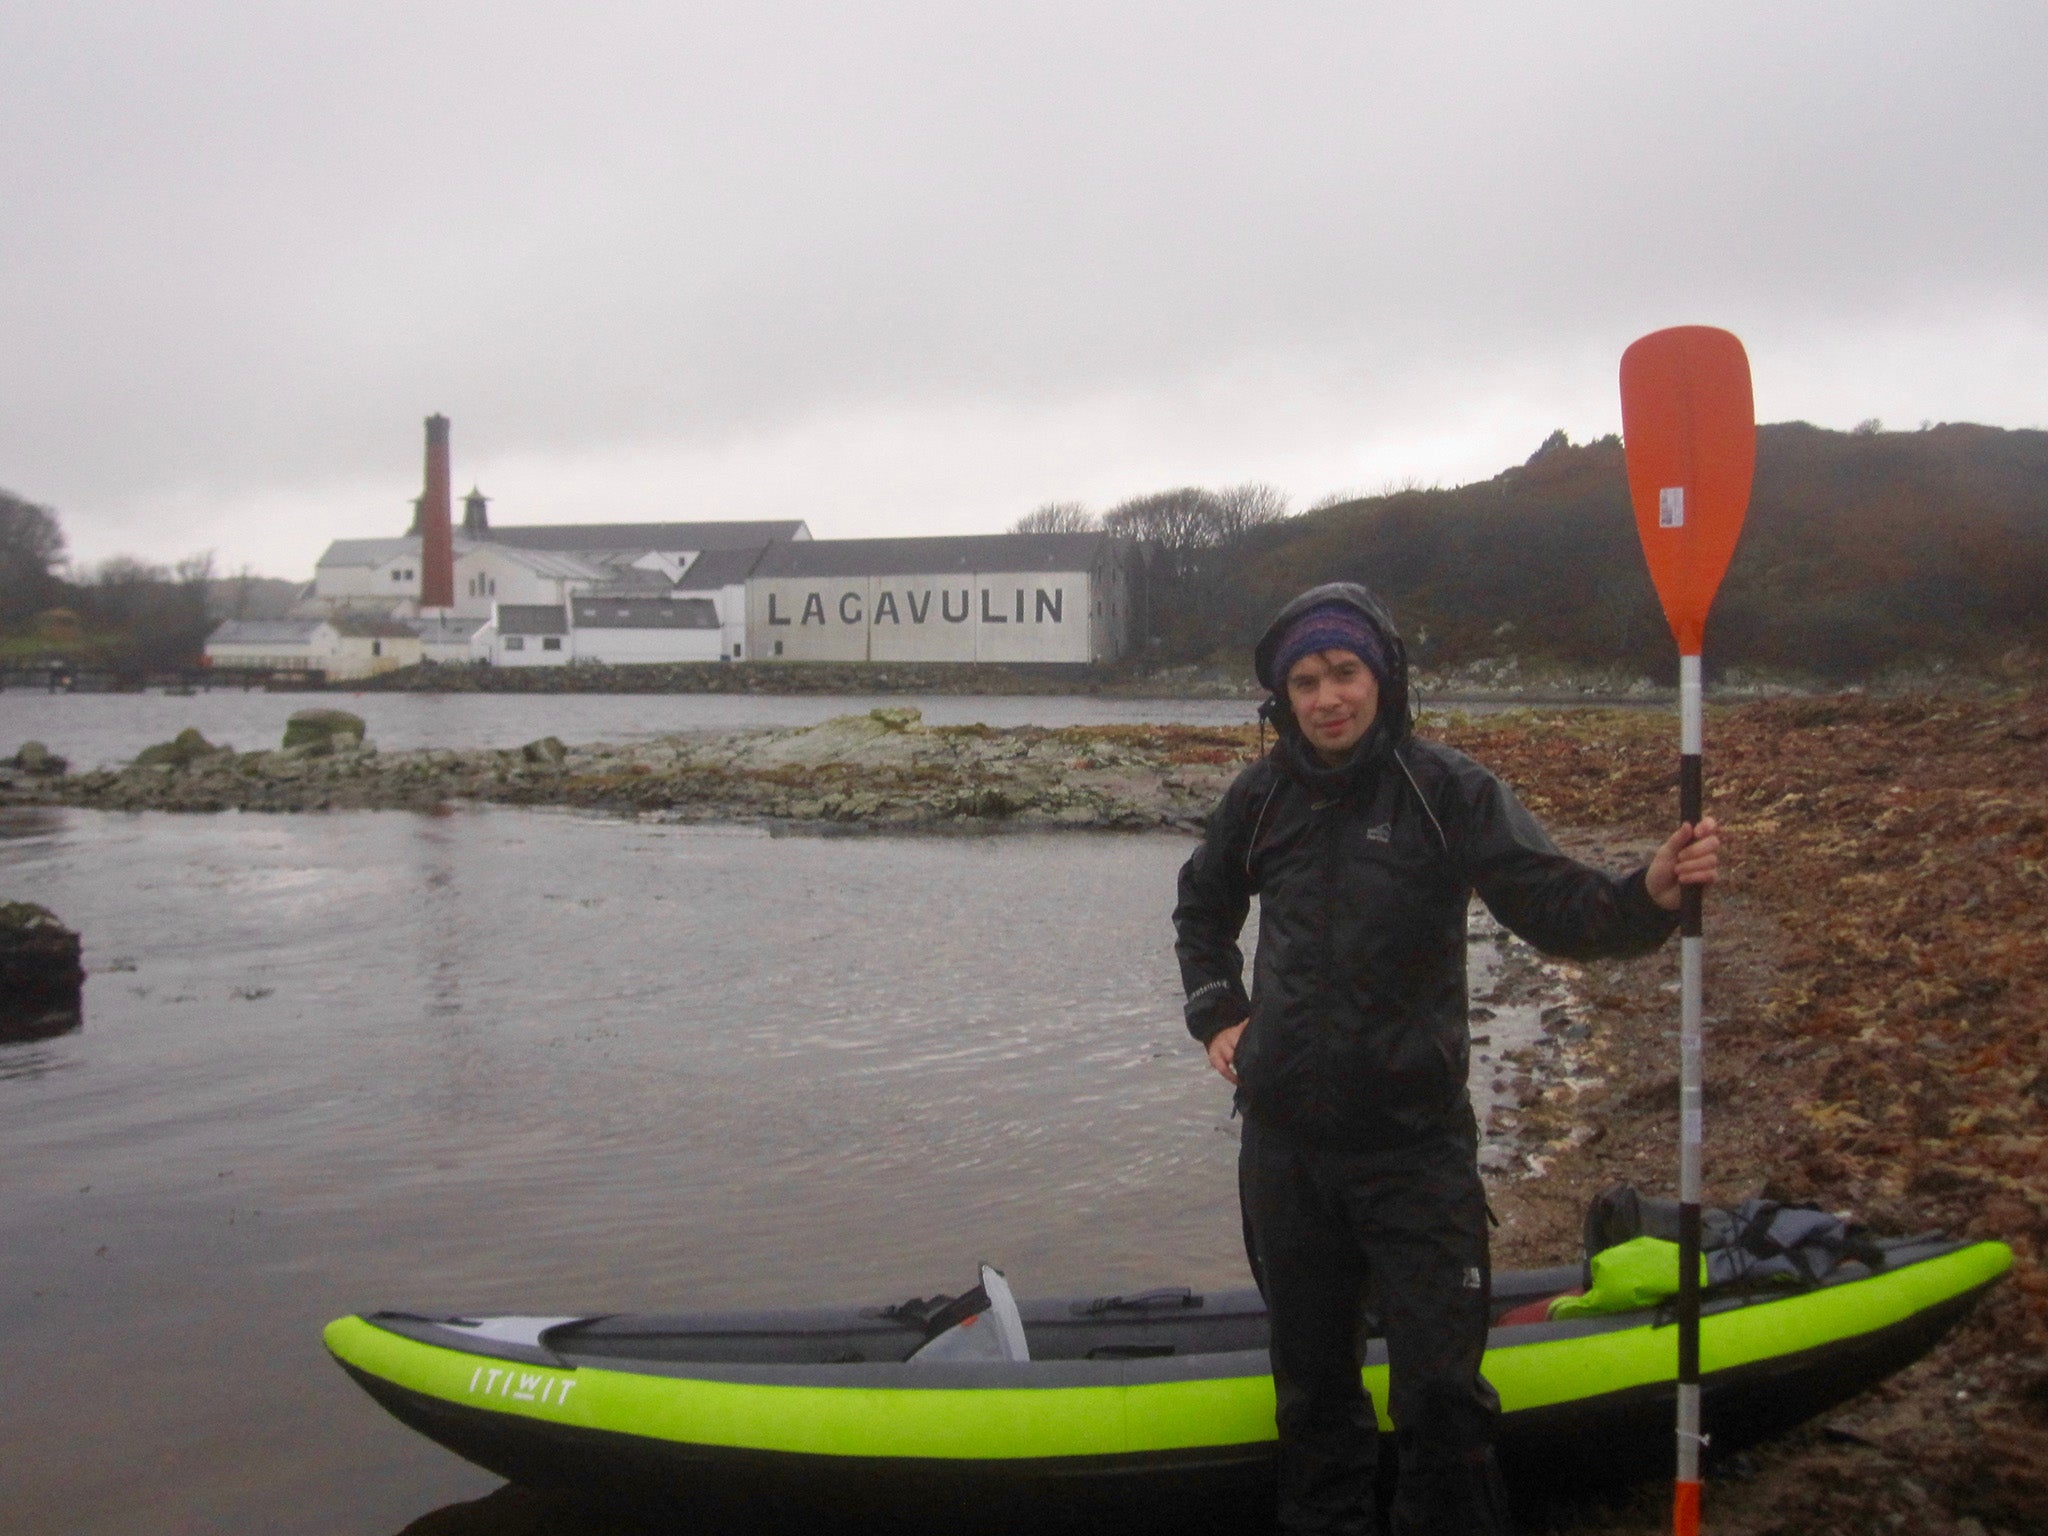 The author about to take to the sea in the calm water outside Lagavulin distillery